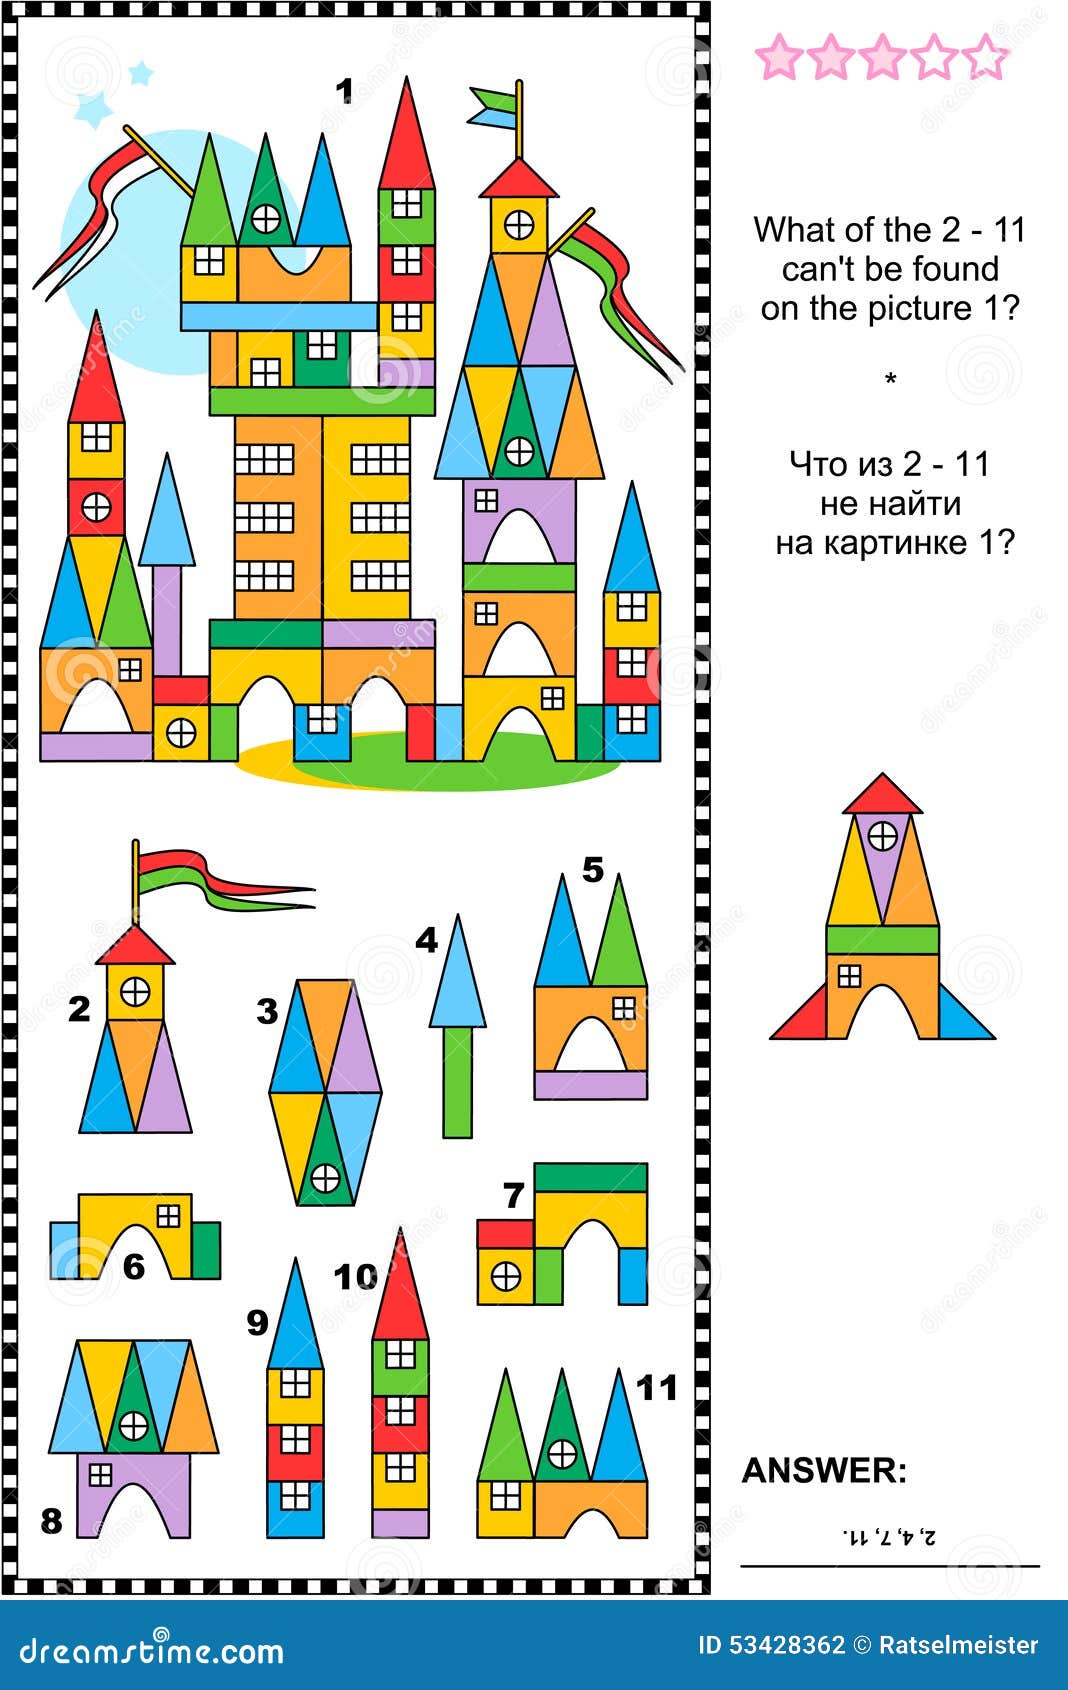 visual puzzle - toy town buildings and details